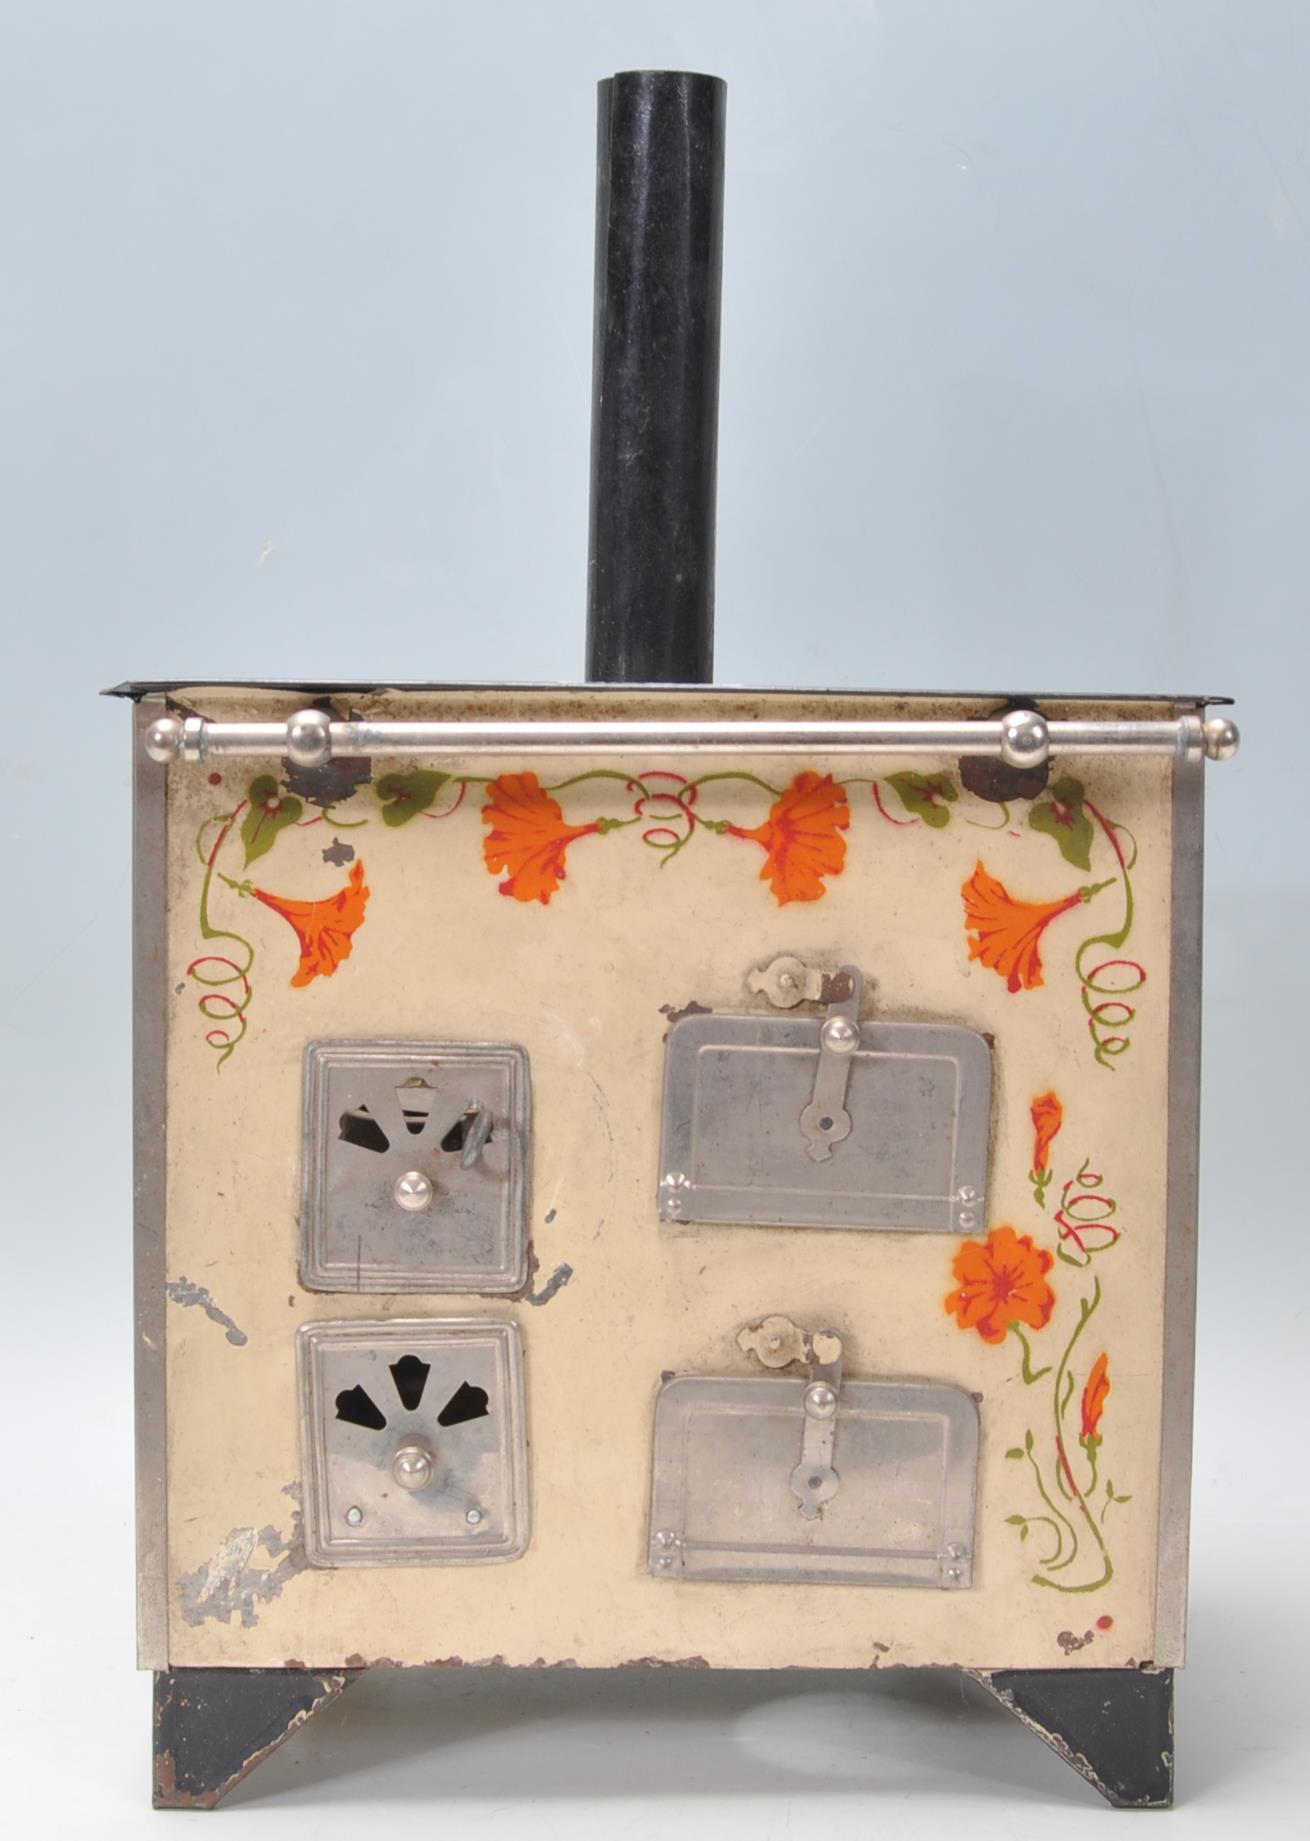 A vintage 20th Century tin model of a stove / oven - Image 2 of 9